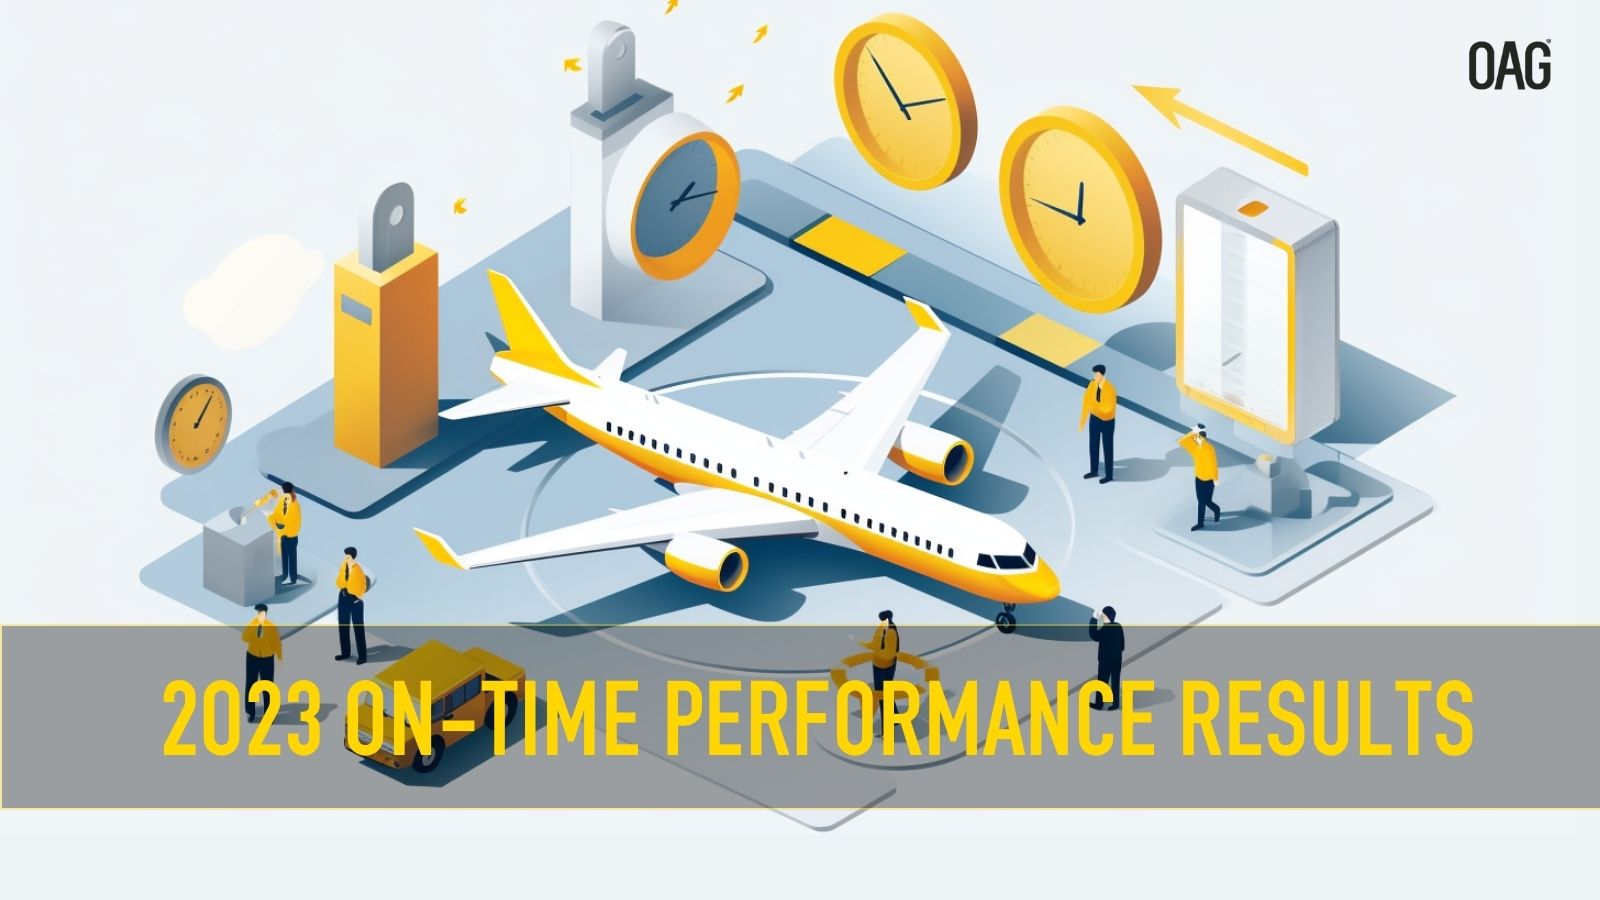 On-time Performance 2023 Press Release